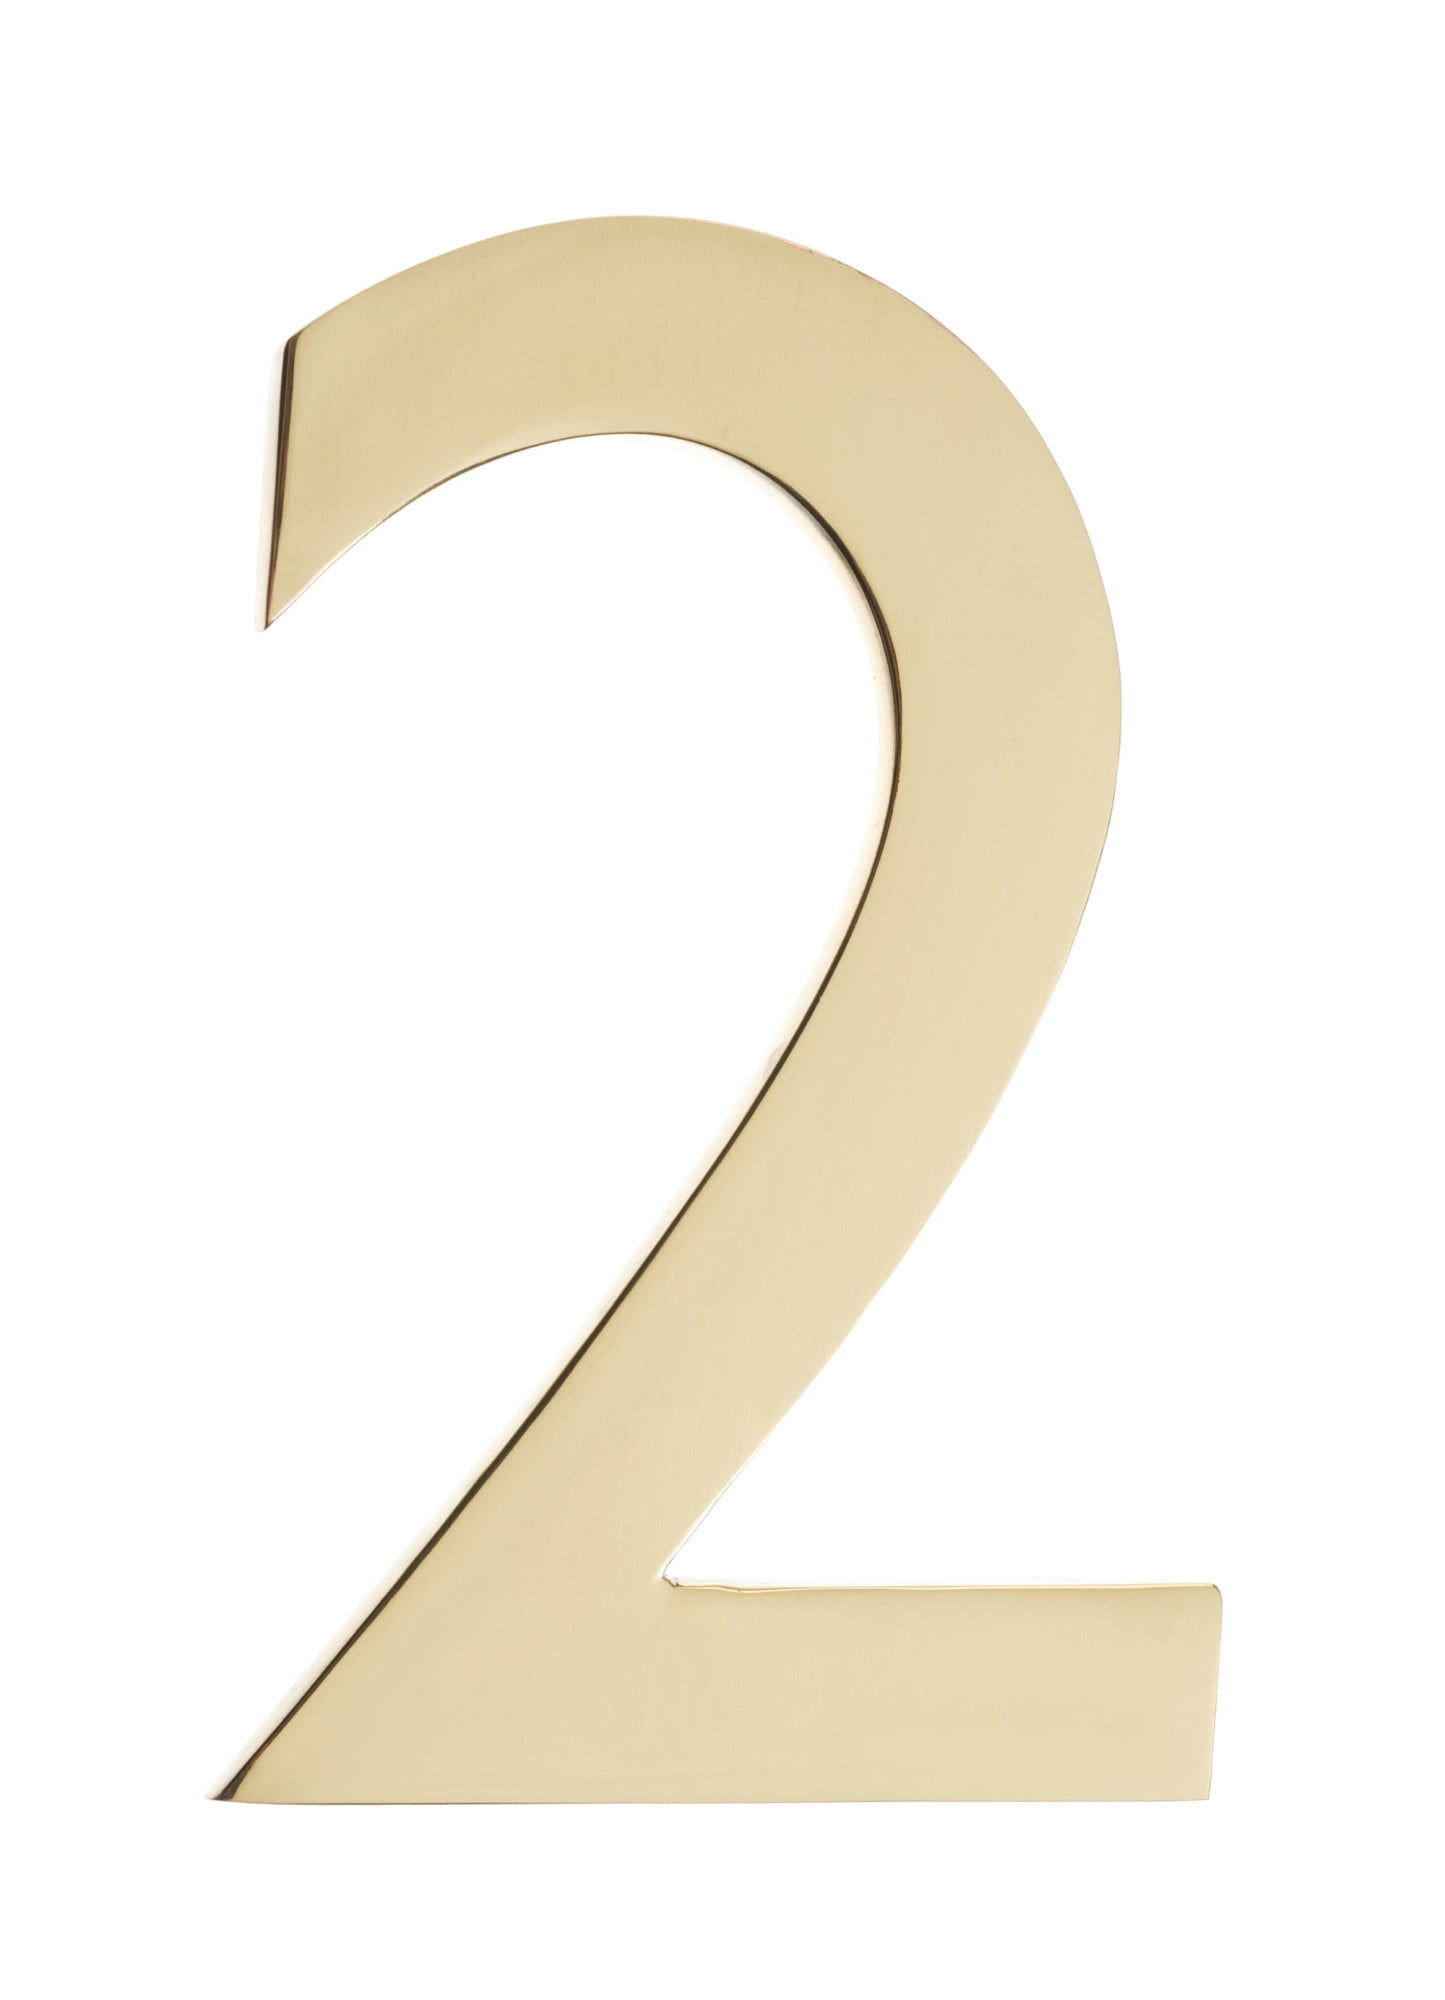 House Number 2, Polished Brass - 5 In.